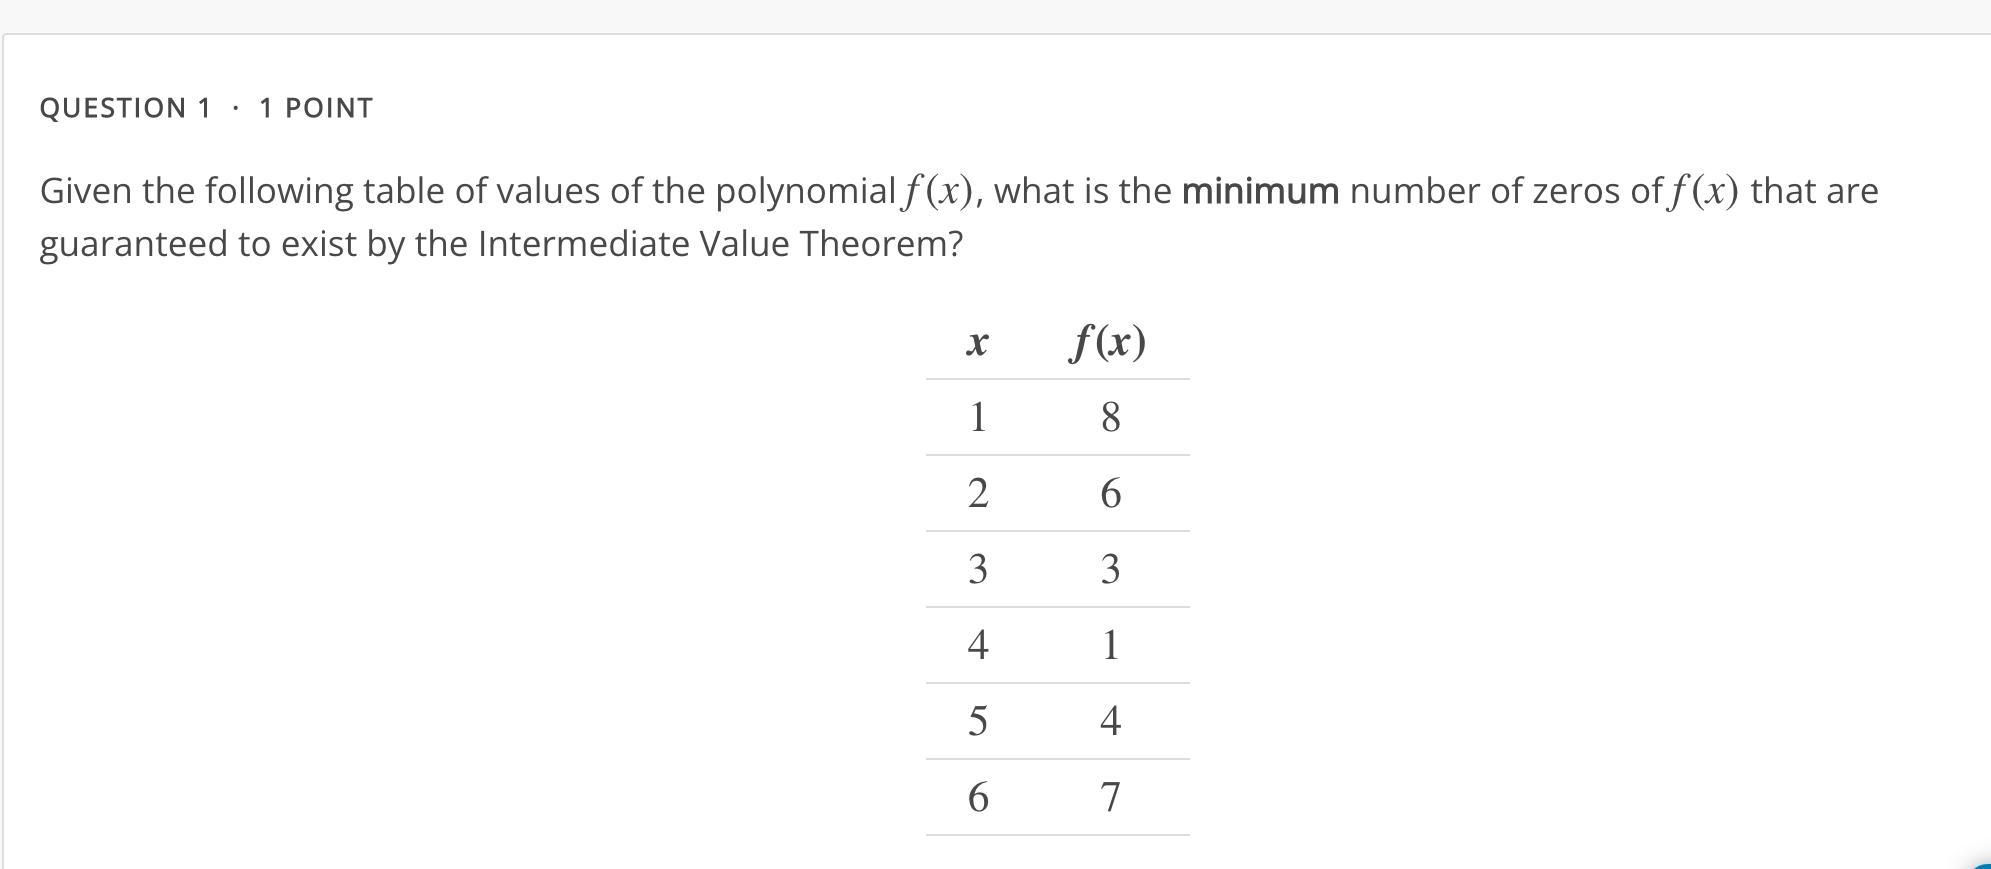 Given The Following Table Of Values Of The Polynomial F(x), What Is The Minimum Number Of Zeros Of F(x)